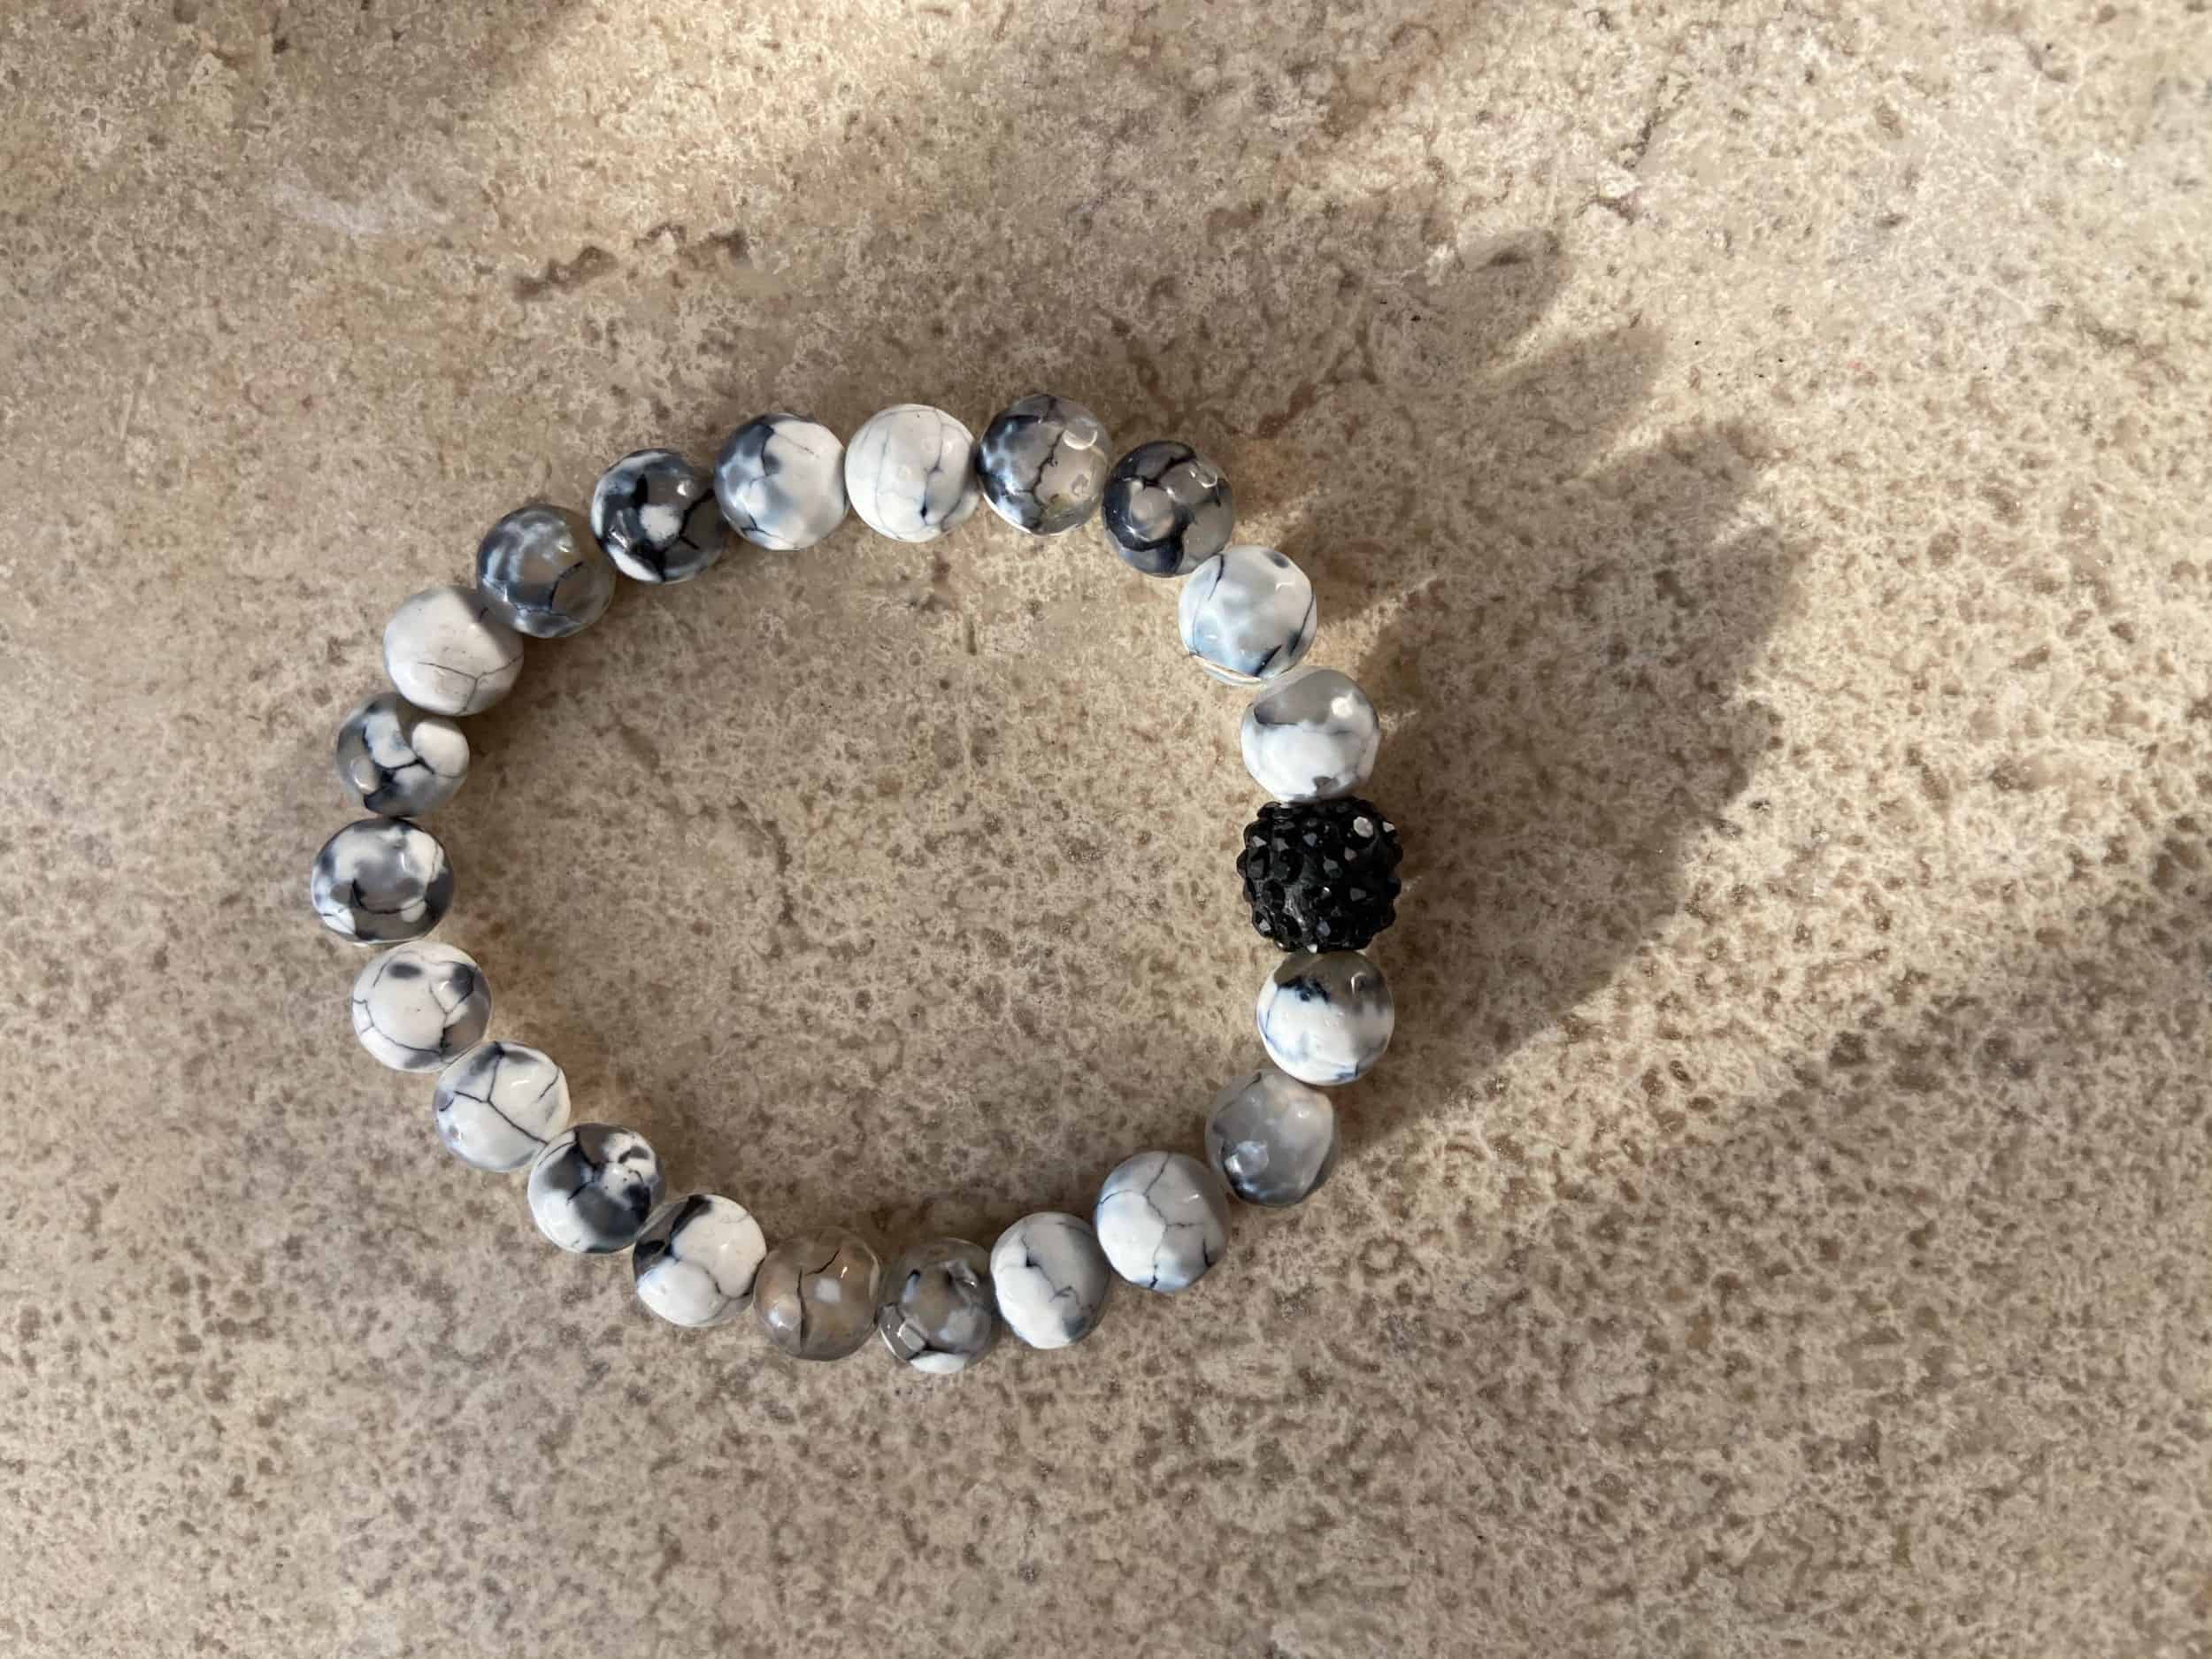 This Natural Zebra Jasper Stretchy Bracelet is made with love by Adelu Jewelry! Shop more unique gift ideas today with Spots Initiatives, the best way to support creators.